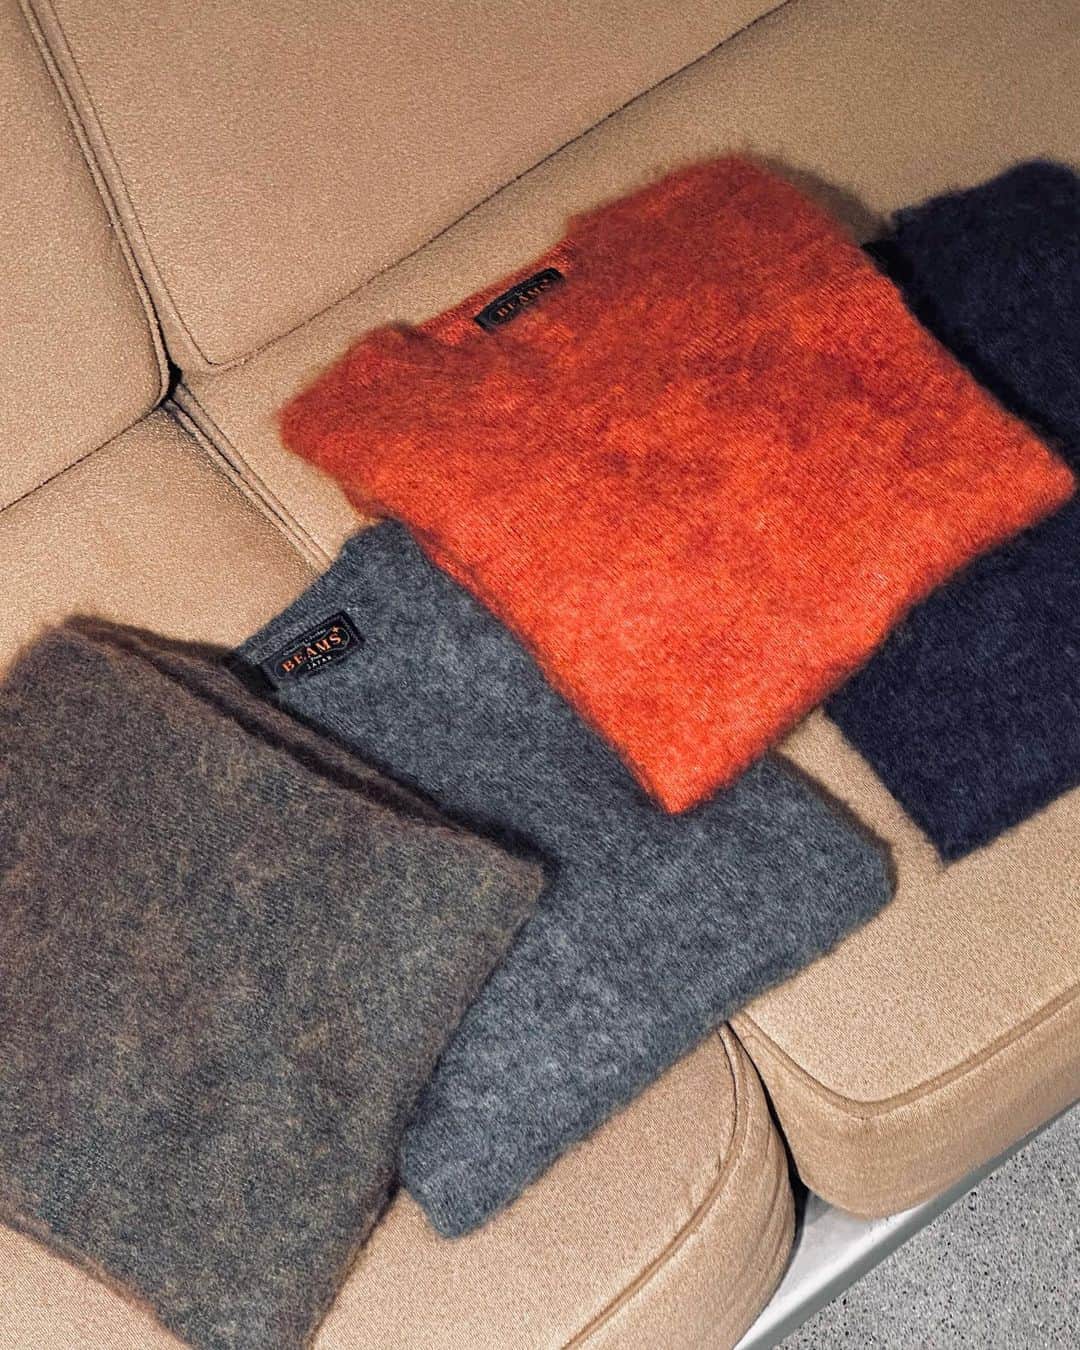 BEAMS+のインスタグラム：「・   BEAMS PLUS RECOMMEND  BEAMS PLUS  "Stretch mohair crew-neck knit"  Mohair knit with a warm expression. The long fur gives a soft impression. The use of domestically produced materials and the fact that it does not easily lose its shape are also recommended points.  -------------------------------------  暖かみのある表情のモヘアニット。毛足の長い印象は柔和な印象です。国内生産の素材を使用し、型崩れもしにくい所もお薦めのポイント。   #beams #beamsplus #beamsplusharajuku  #mensfashion #mohair #mohairknit」